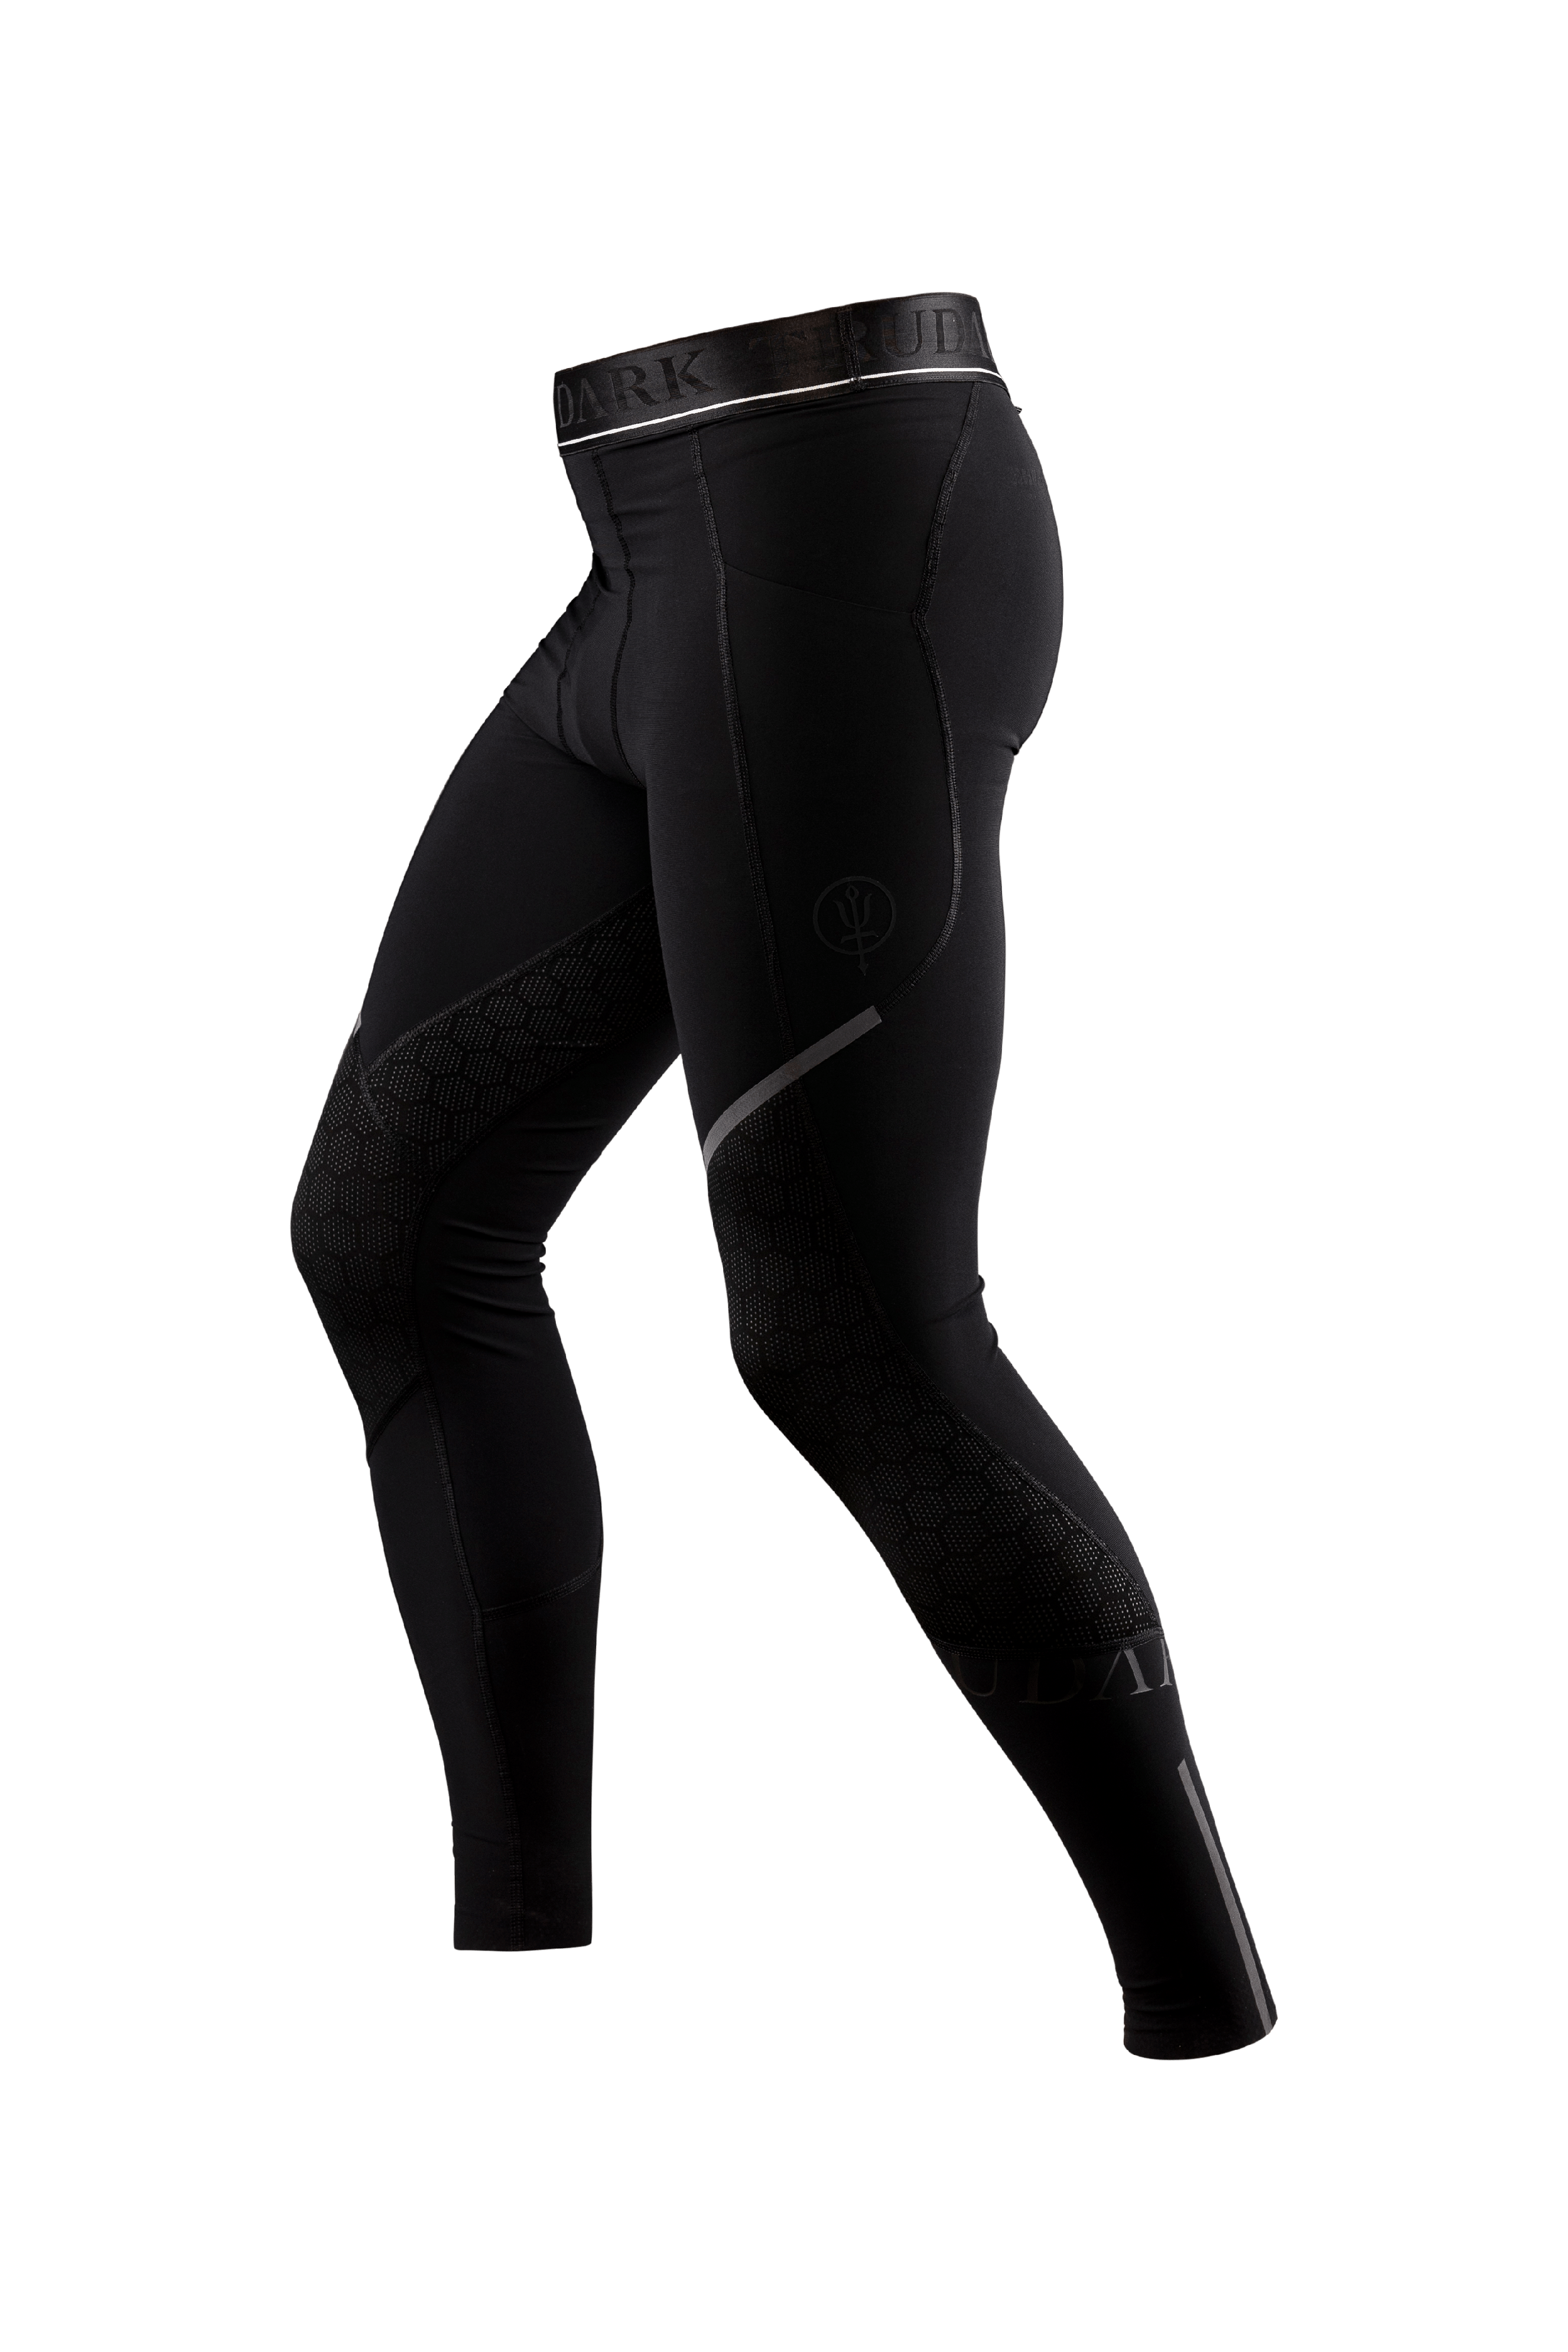 Force Tech Leggings  Running Leggings For Workouts Or Gym L